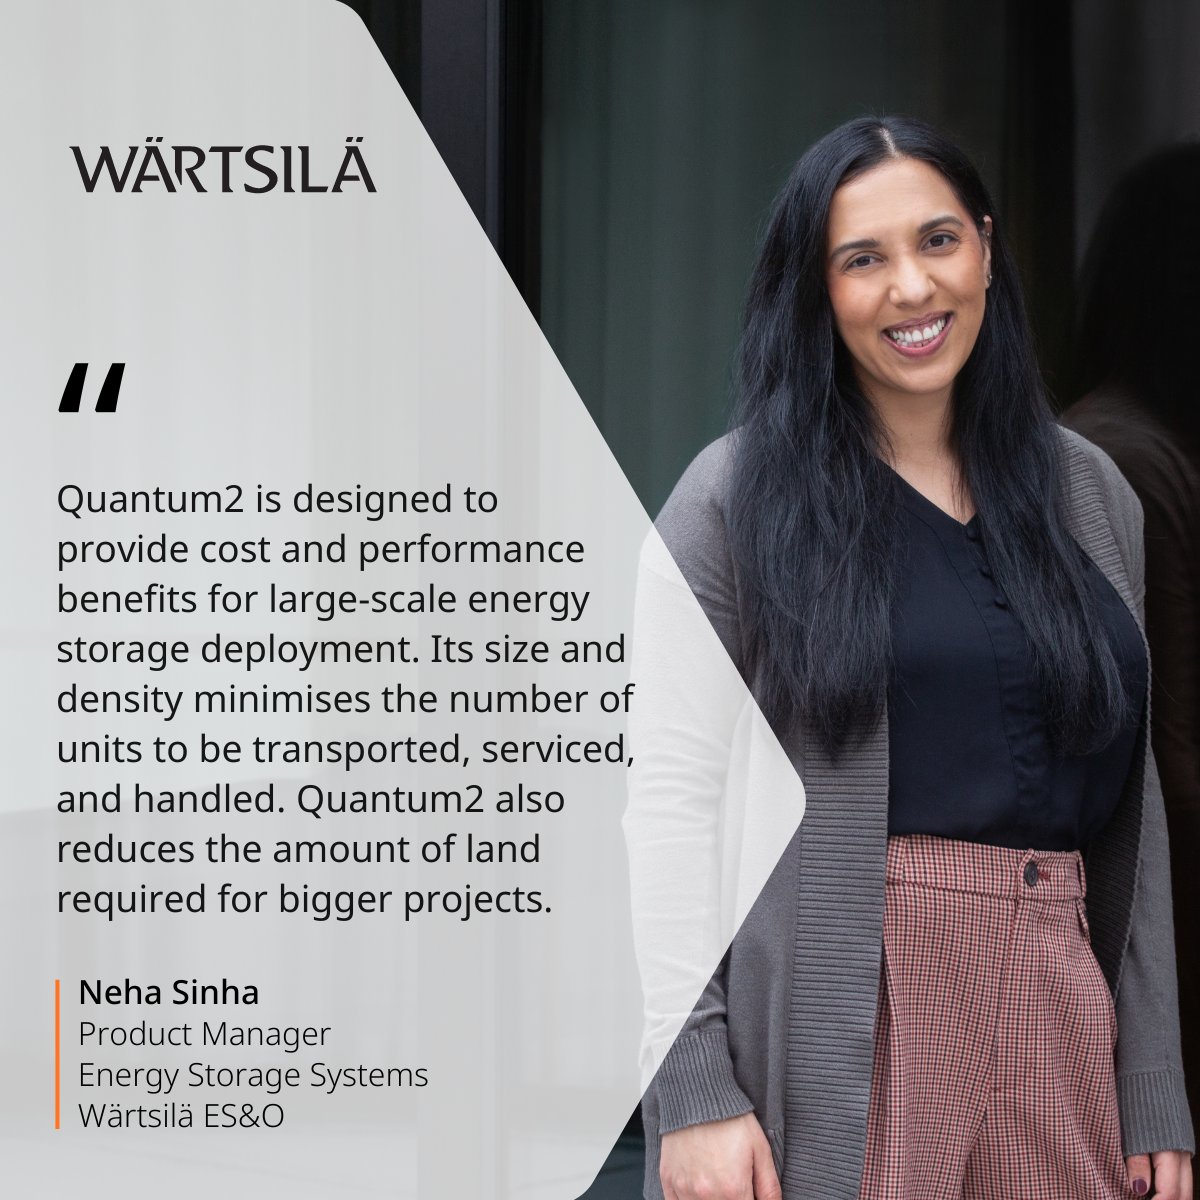 #Quantum2 is a fully-integrated #energystorage system with state-of-the-art features. ✅ Unparalleled safety ✅ Cost-effective transit, construction, installation & commissioning ✅ High energy density & reduced land requirements More: storage.wartsila.com/resource/quant… #Decarbonisation